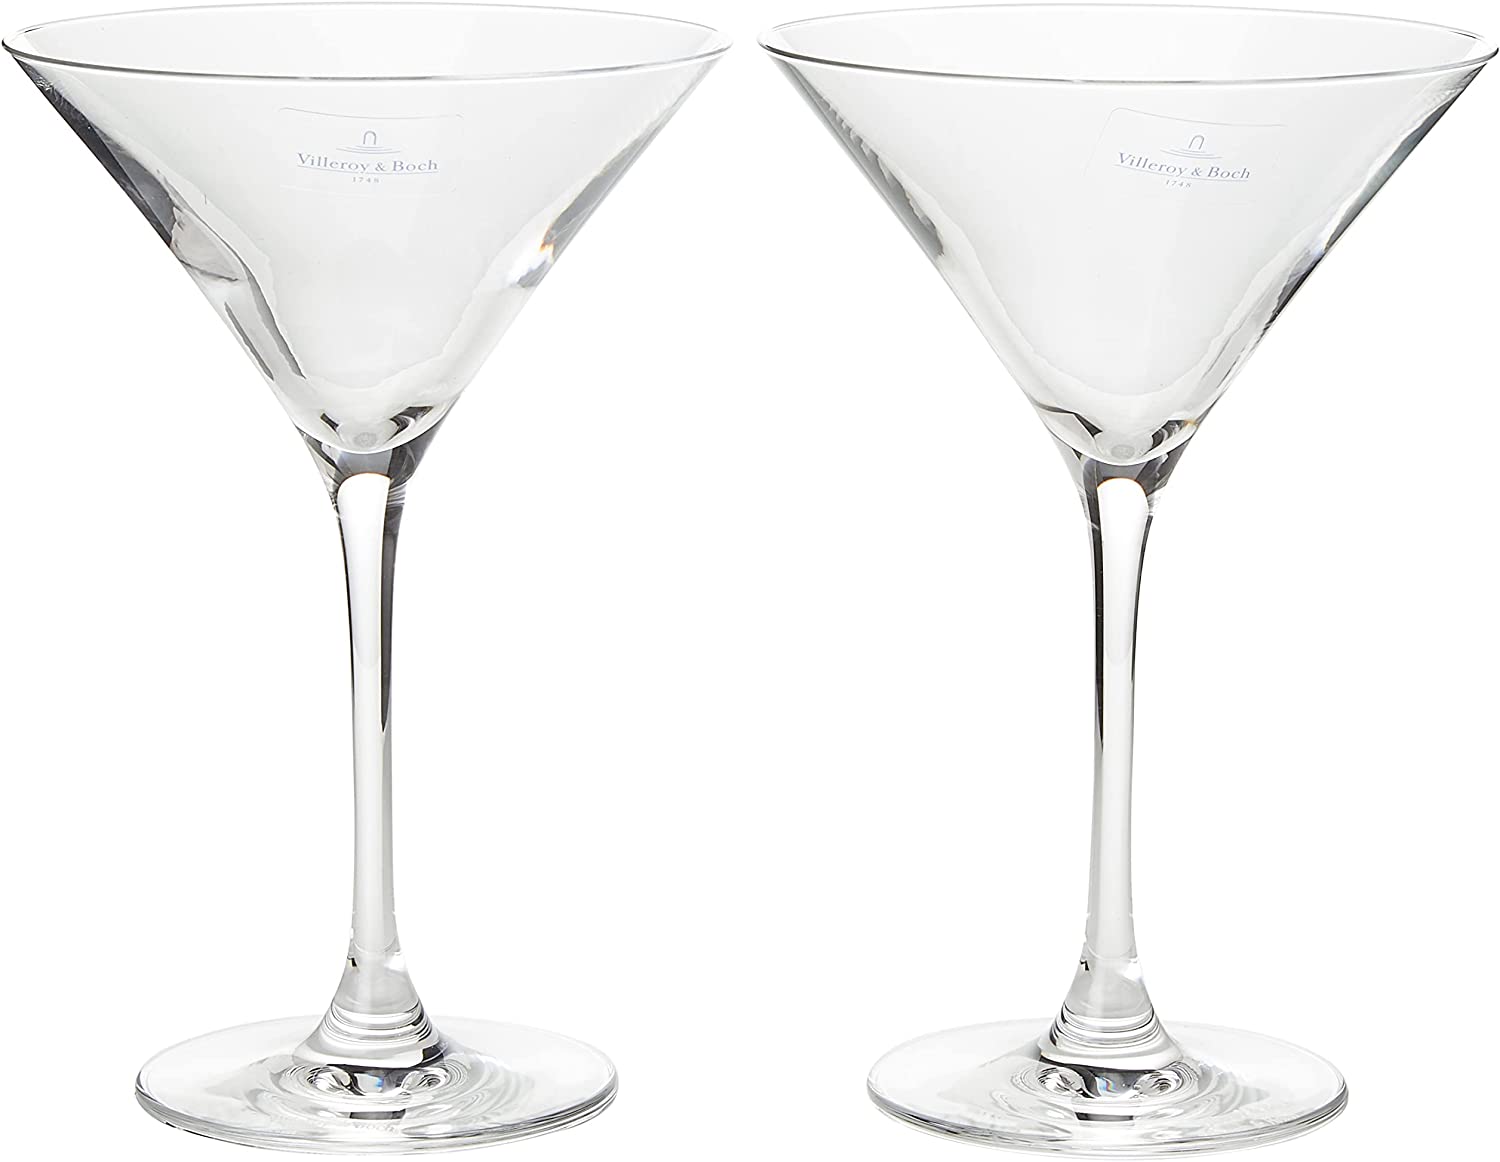 Villeroy and Boch Purismo Bar Martini / Cocktail Glass set of 2